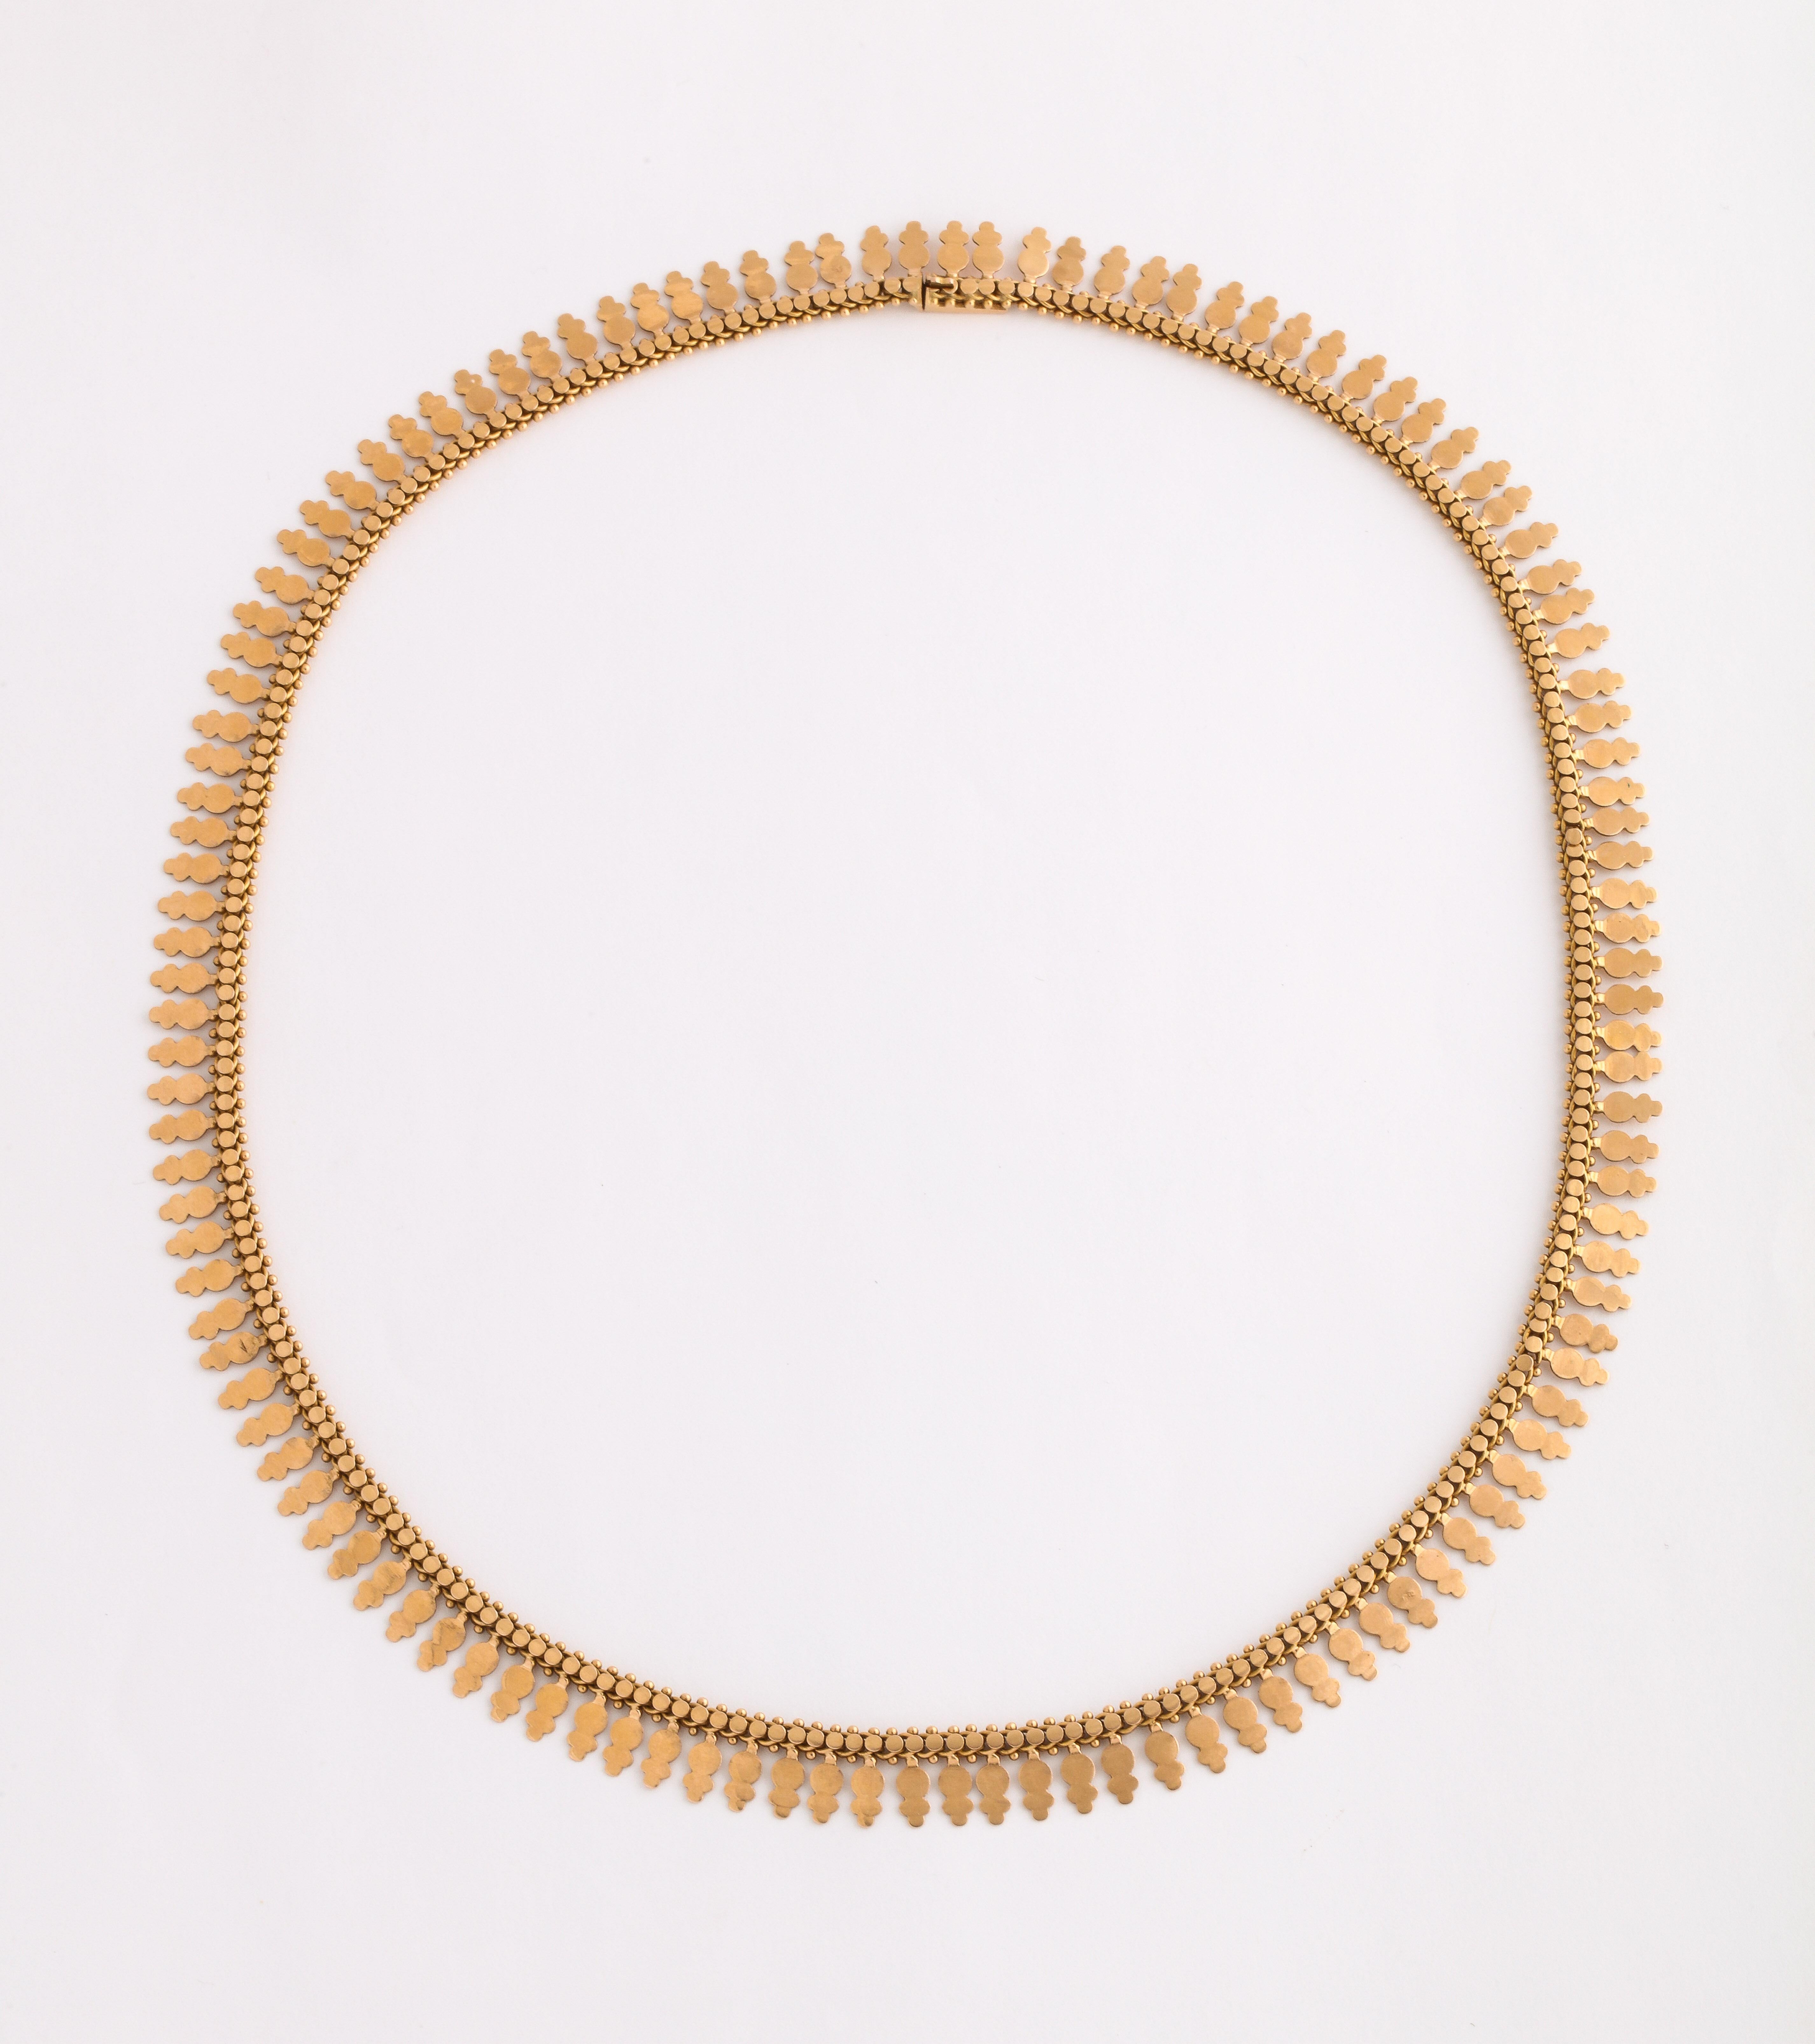 A flexible, sleek 18 Kt Gold chain in abstract fringe design was made in France in c. 1870.
French jewelers are known to be exceptional jewelry masters and have had this reputation for hundreds of years. The marvelous attraction of this chain is hat